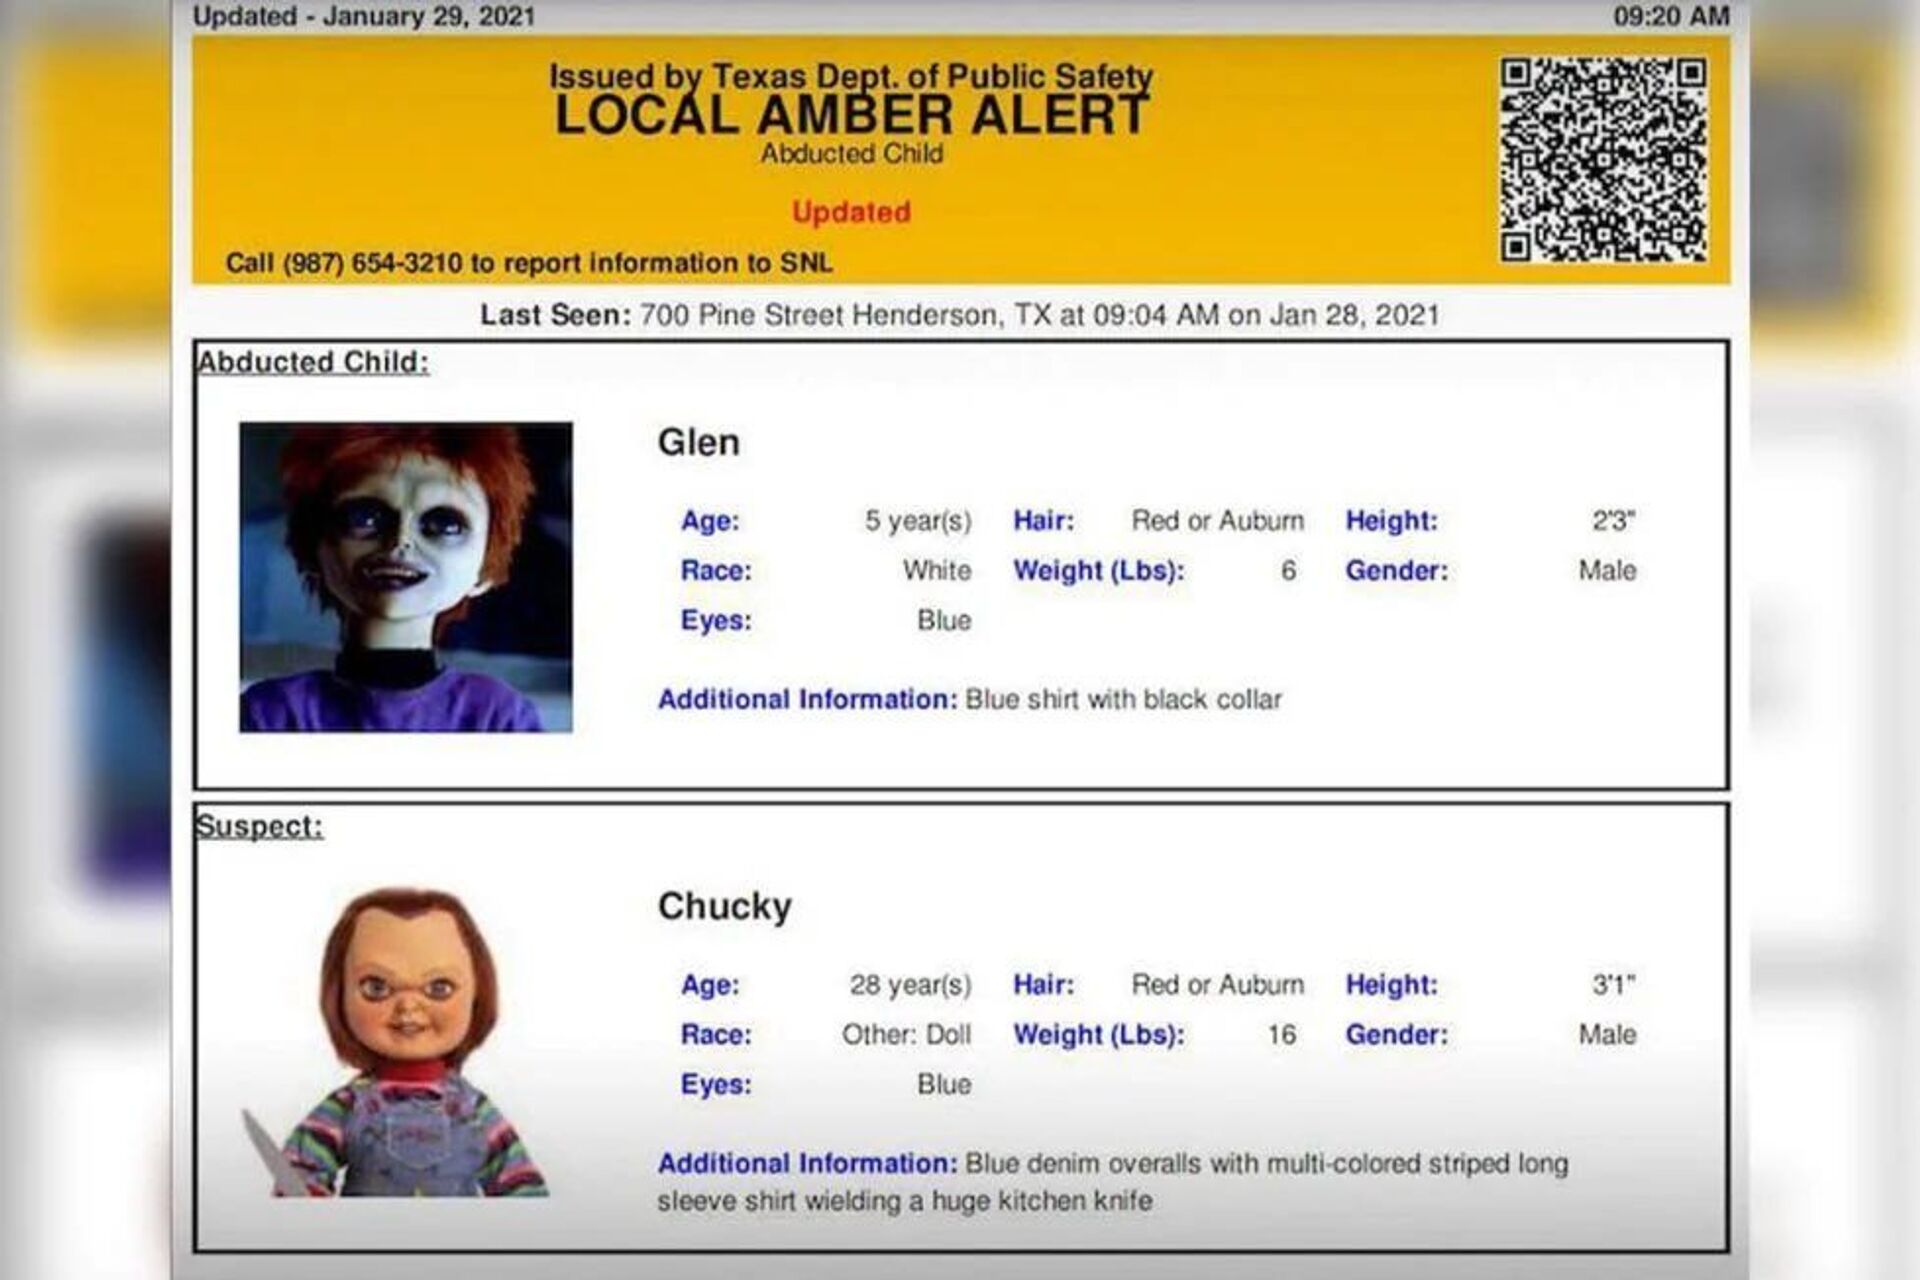 Texas Authorities Reportedly Apologize for Sending Out Creepy Alert About Chucky Doll by Mistake - Sputnik International, 1920, 03.02.2021